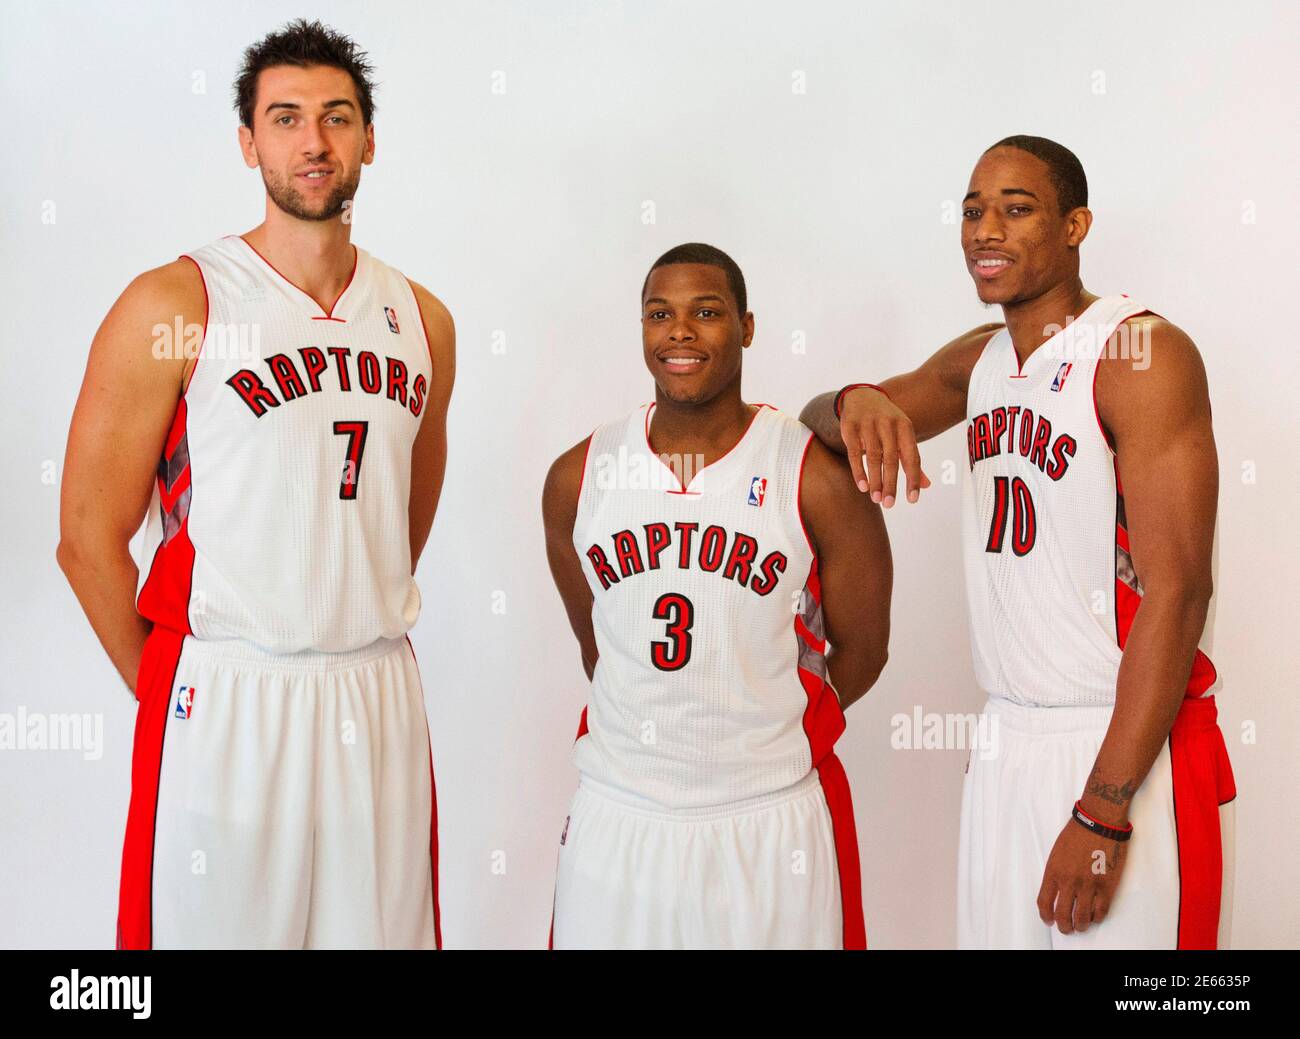 Toronto Raptors L R Andrea Bargnani Kyle Lowry And Demar Derozan Pose For The Team Photographer During The Team S Media Day Before The Upcoming Nba Basketball Season In Toronto October 1 2012 Reuters Mark